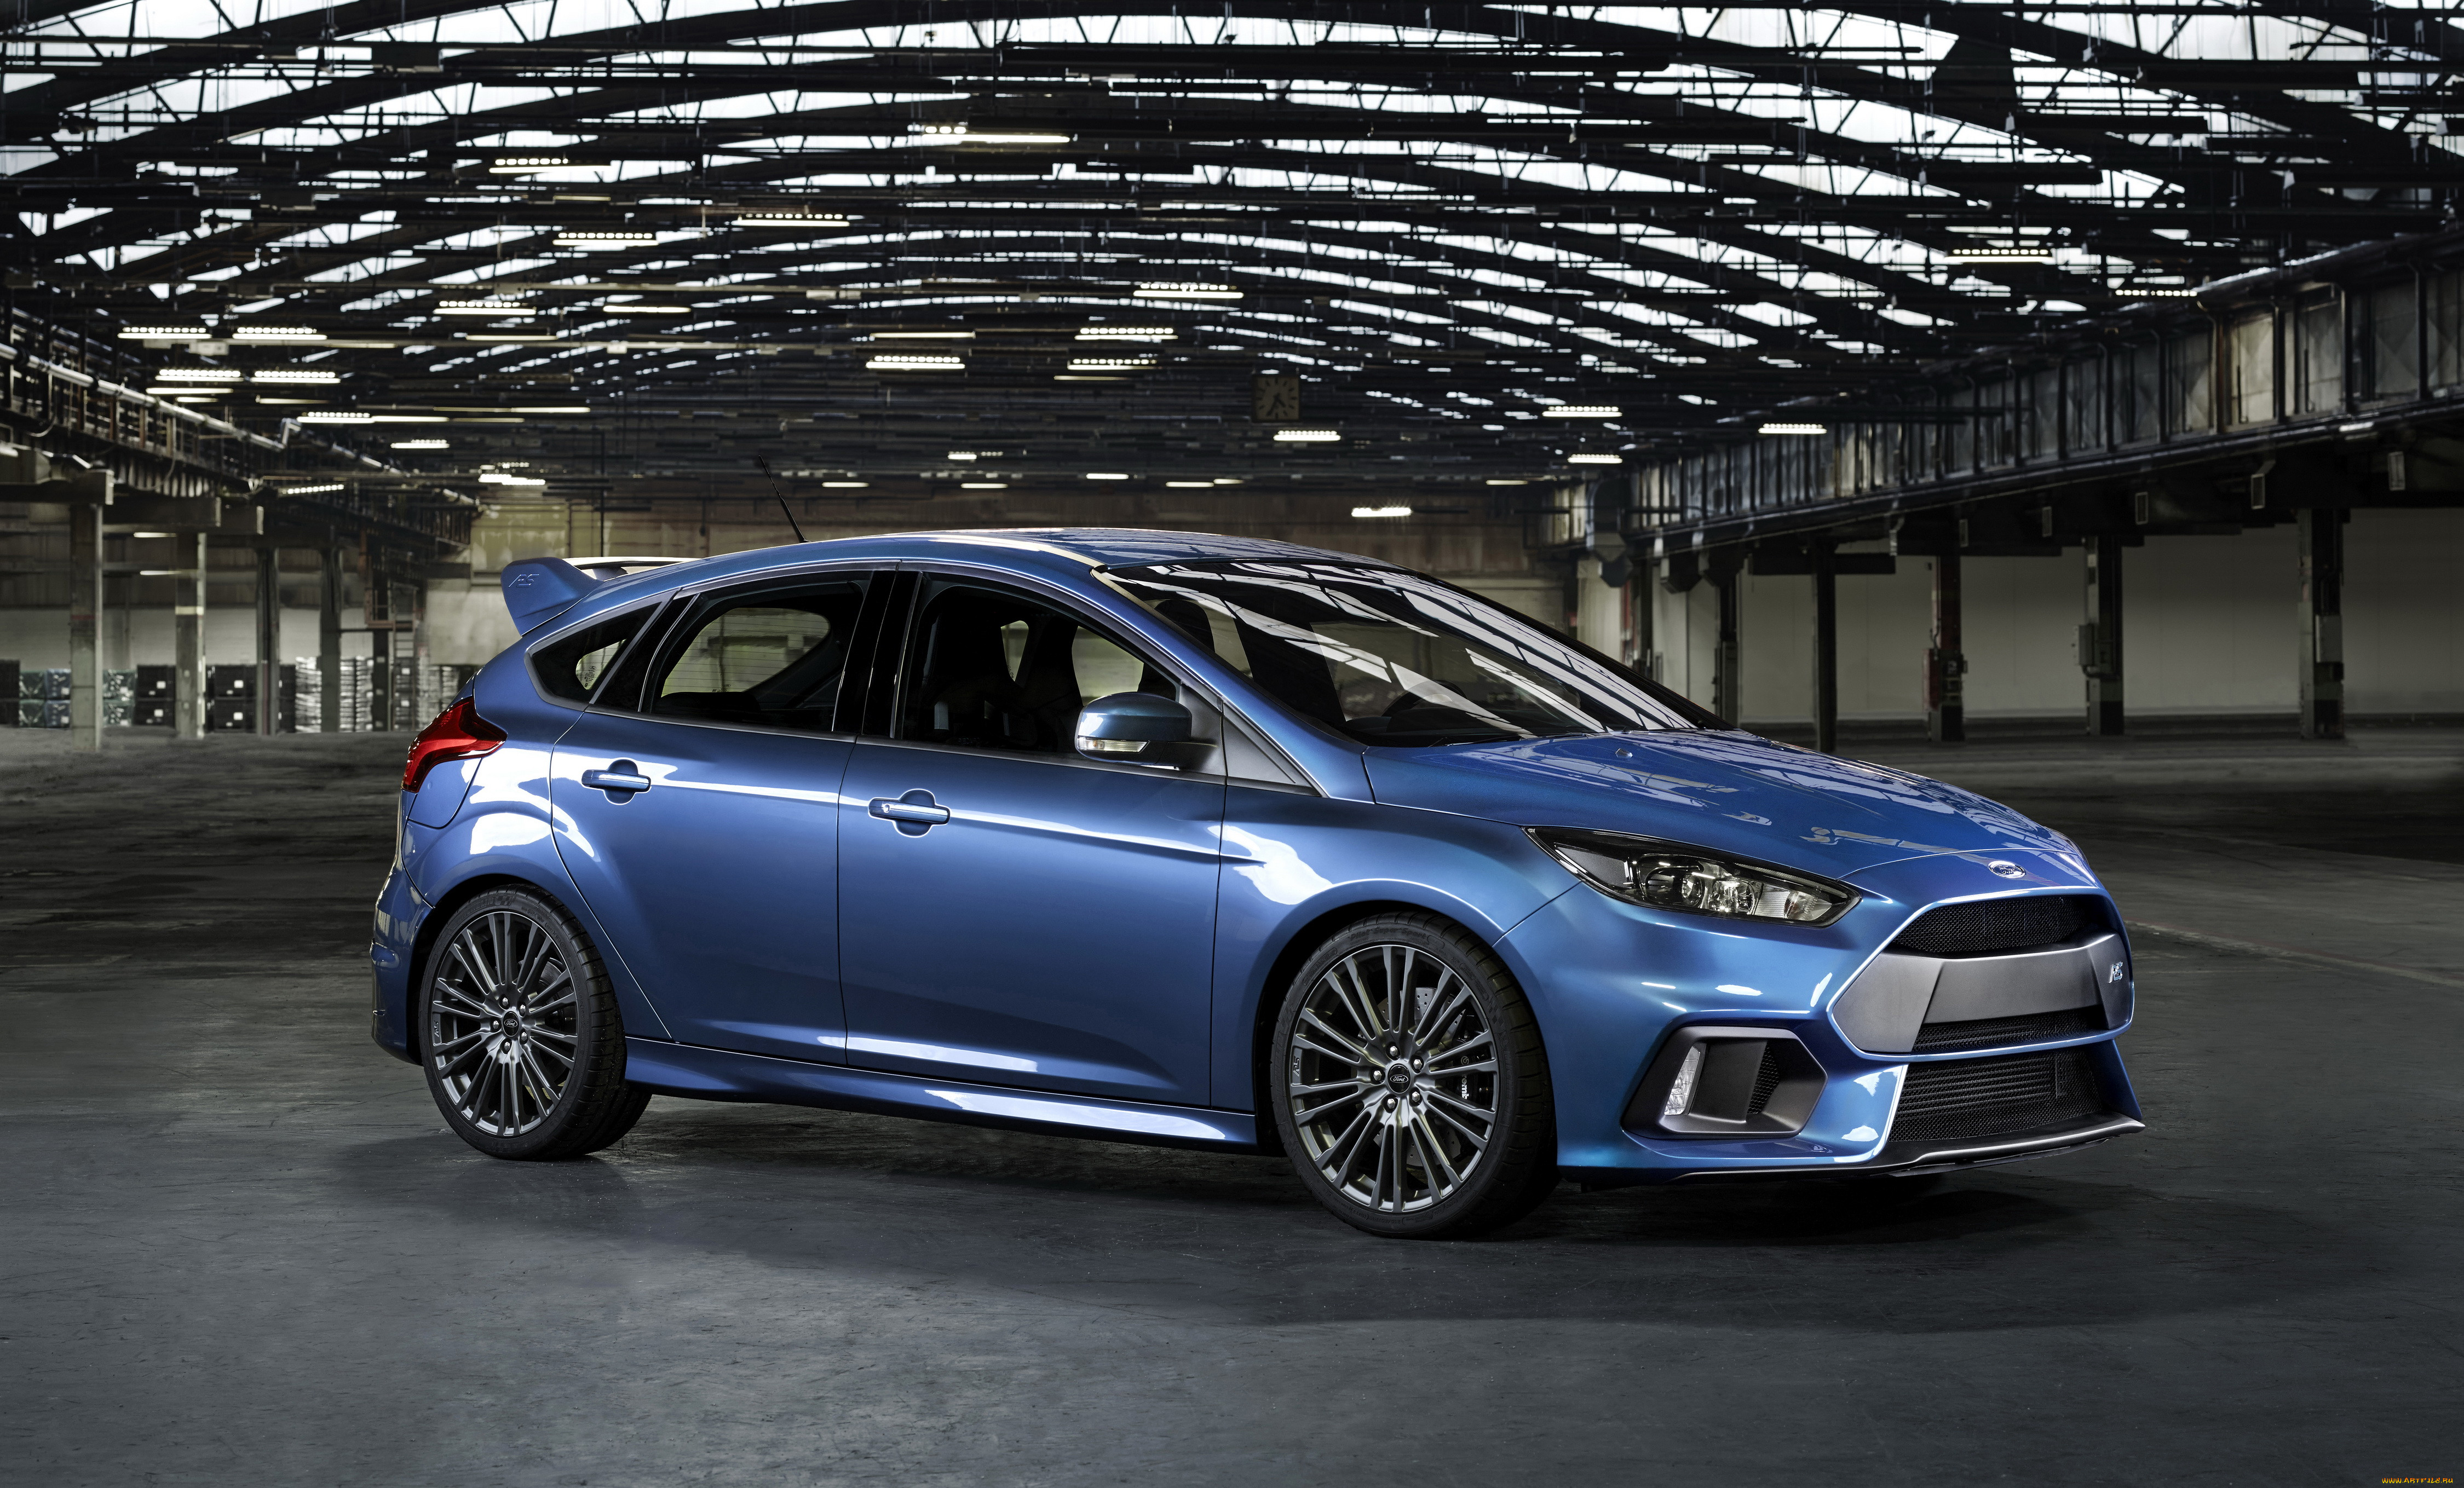 2015 ford focus rs, , ford, , , focus